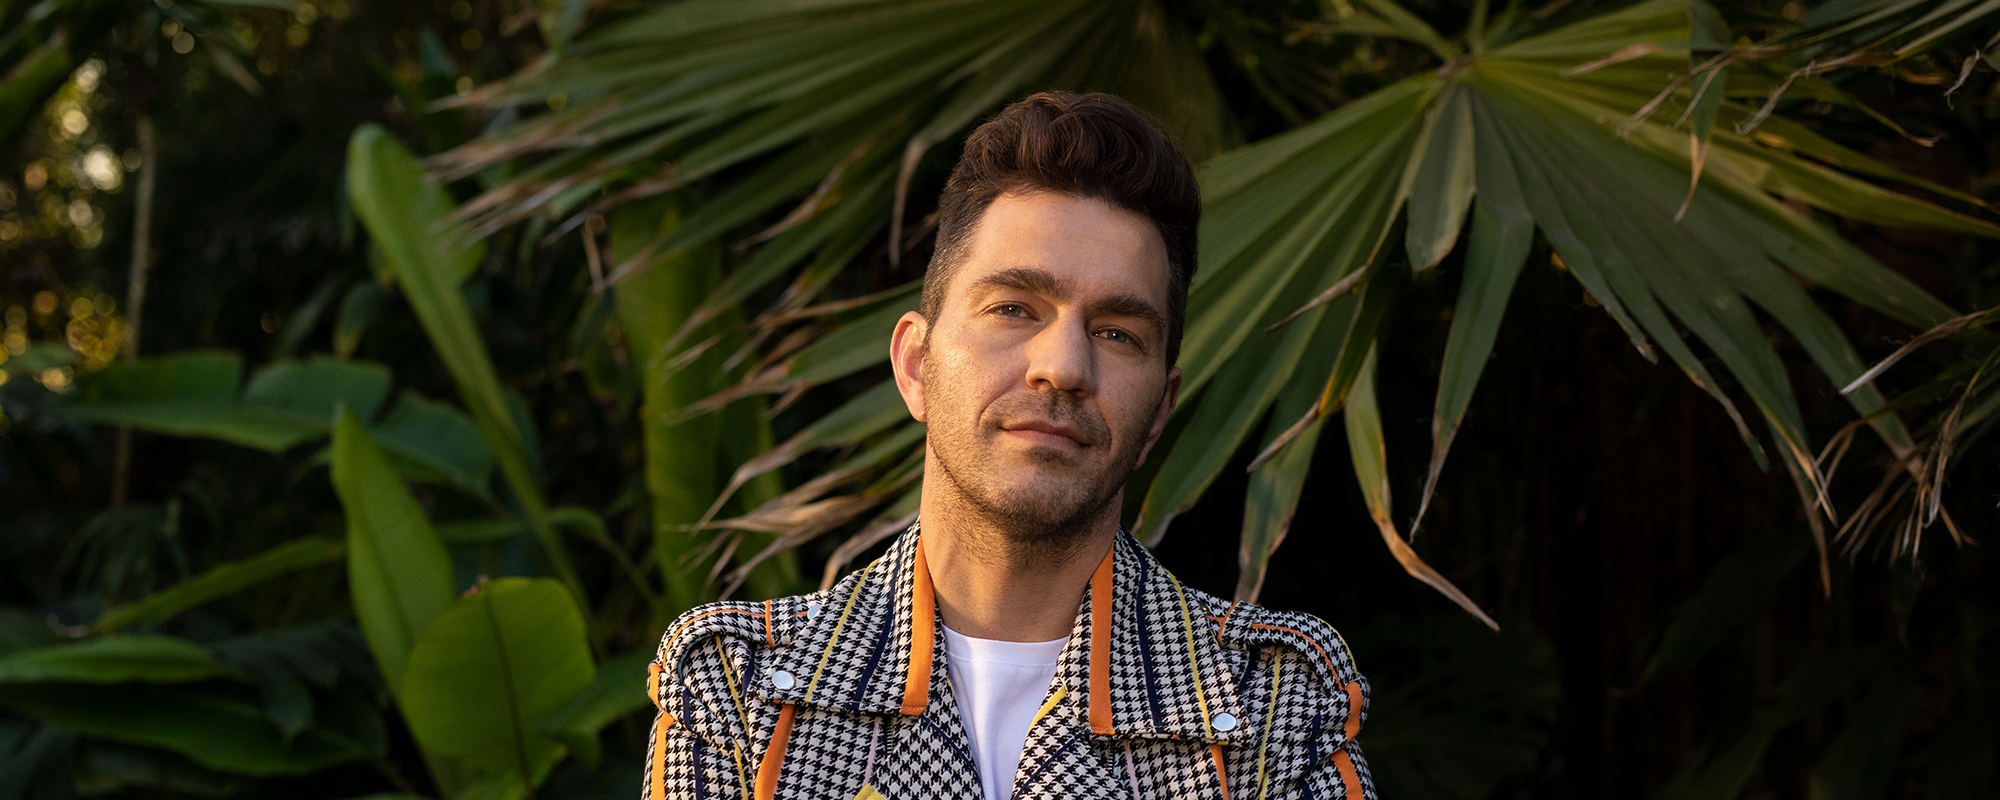 Andy Grammer and R3HAB Reunite For Uplifting New Single “Saved My Life”